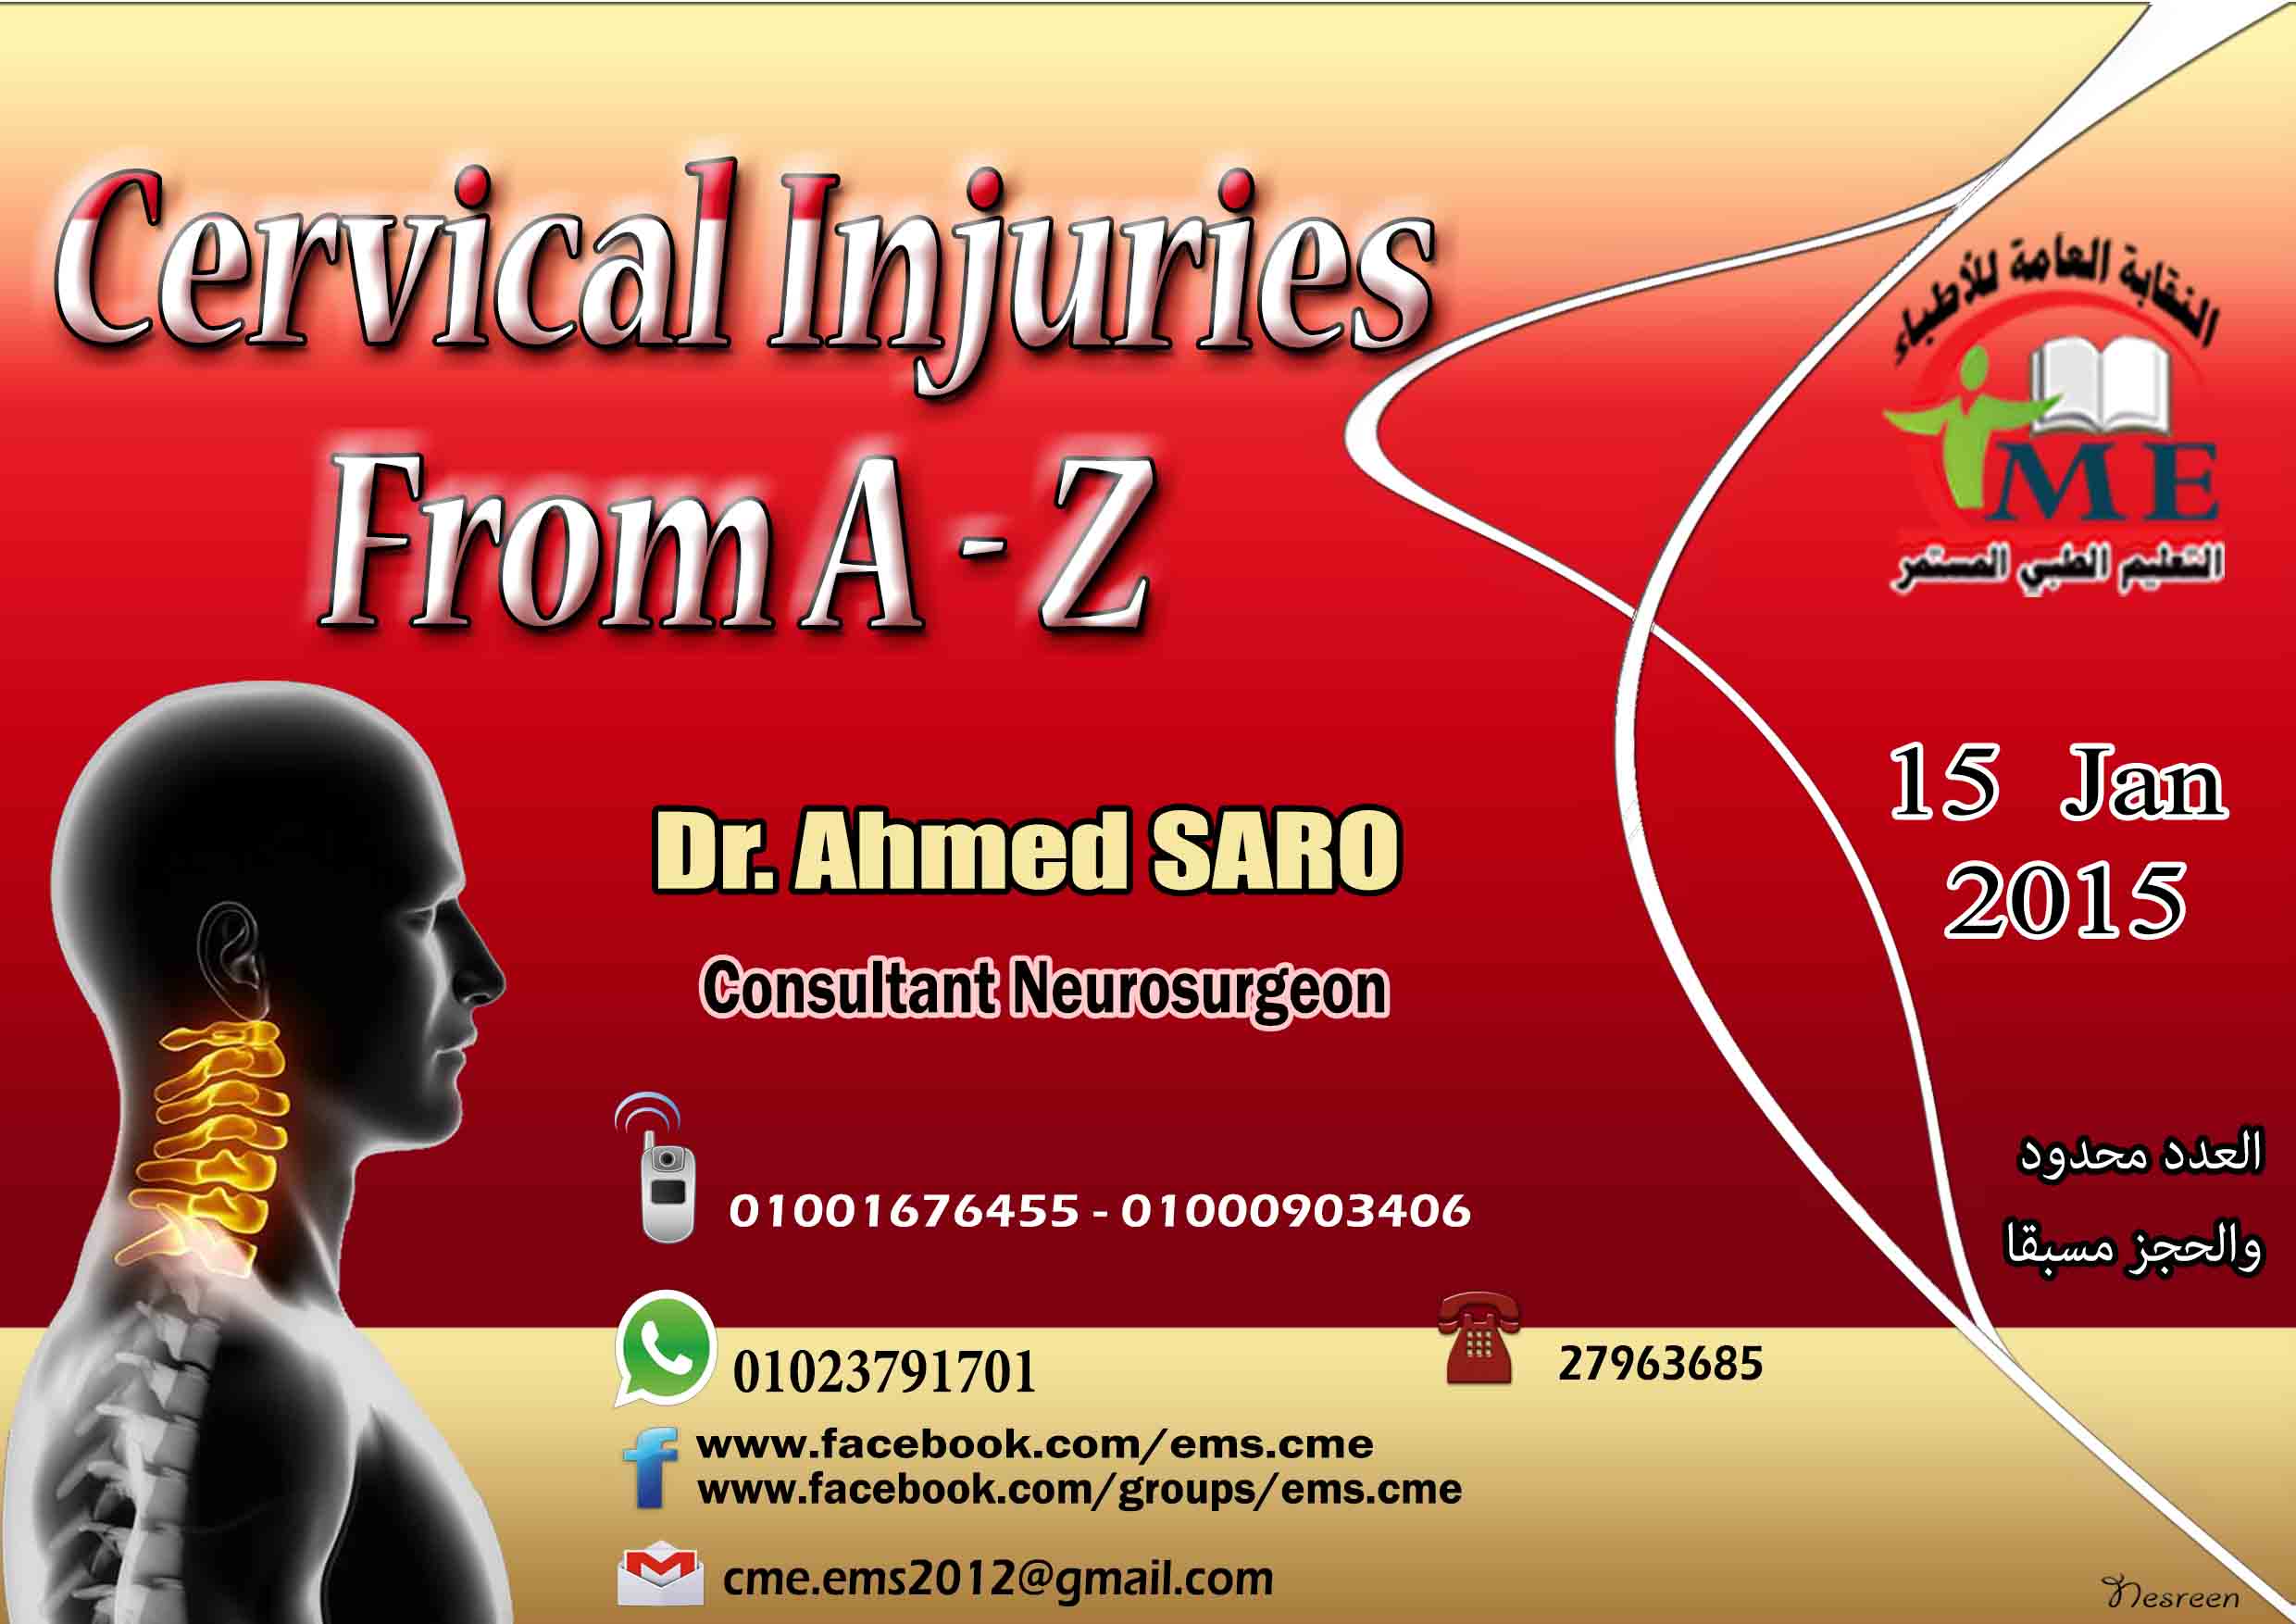 Cervical Injuries From A -Z